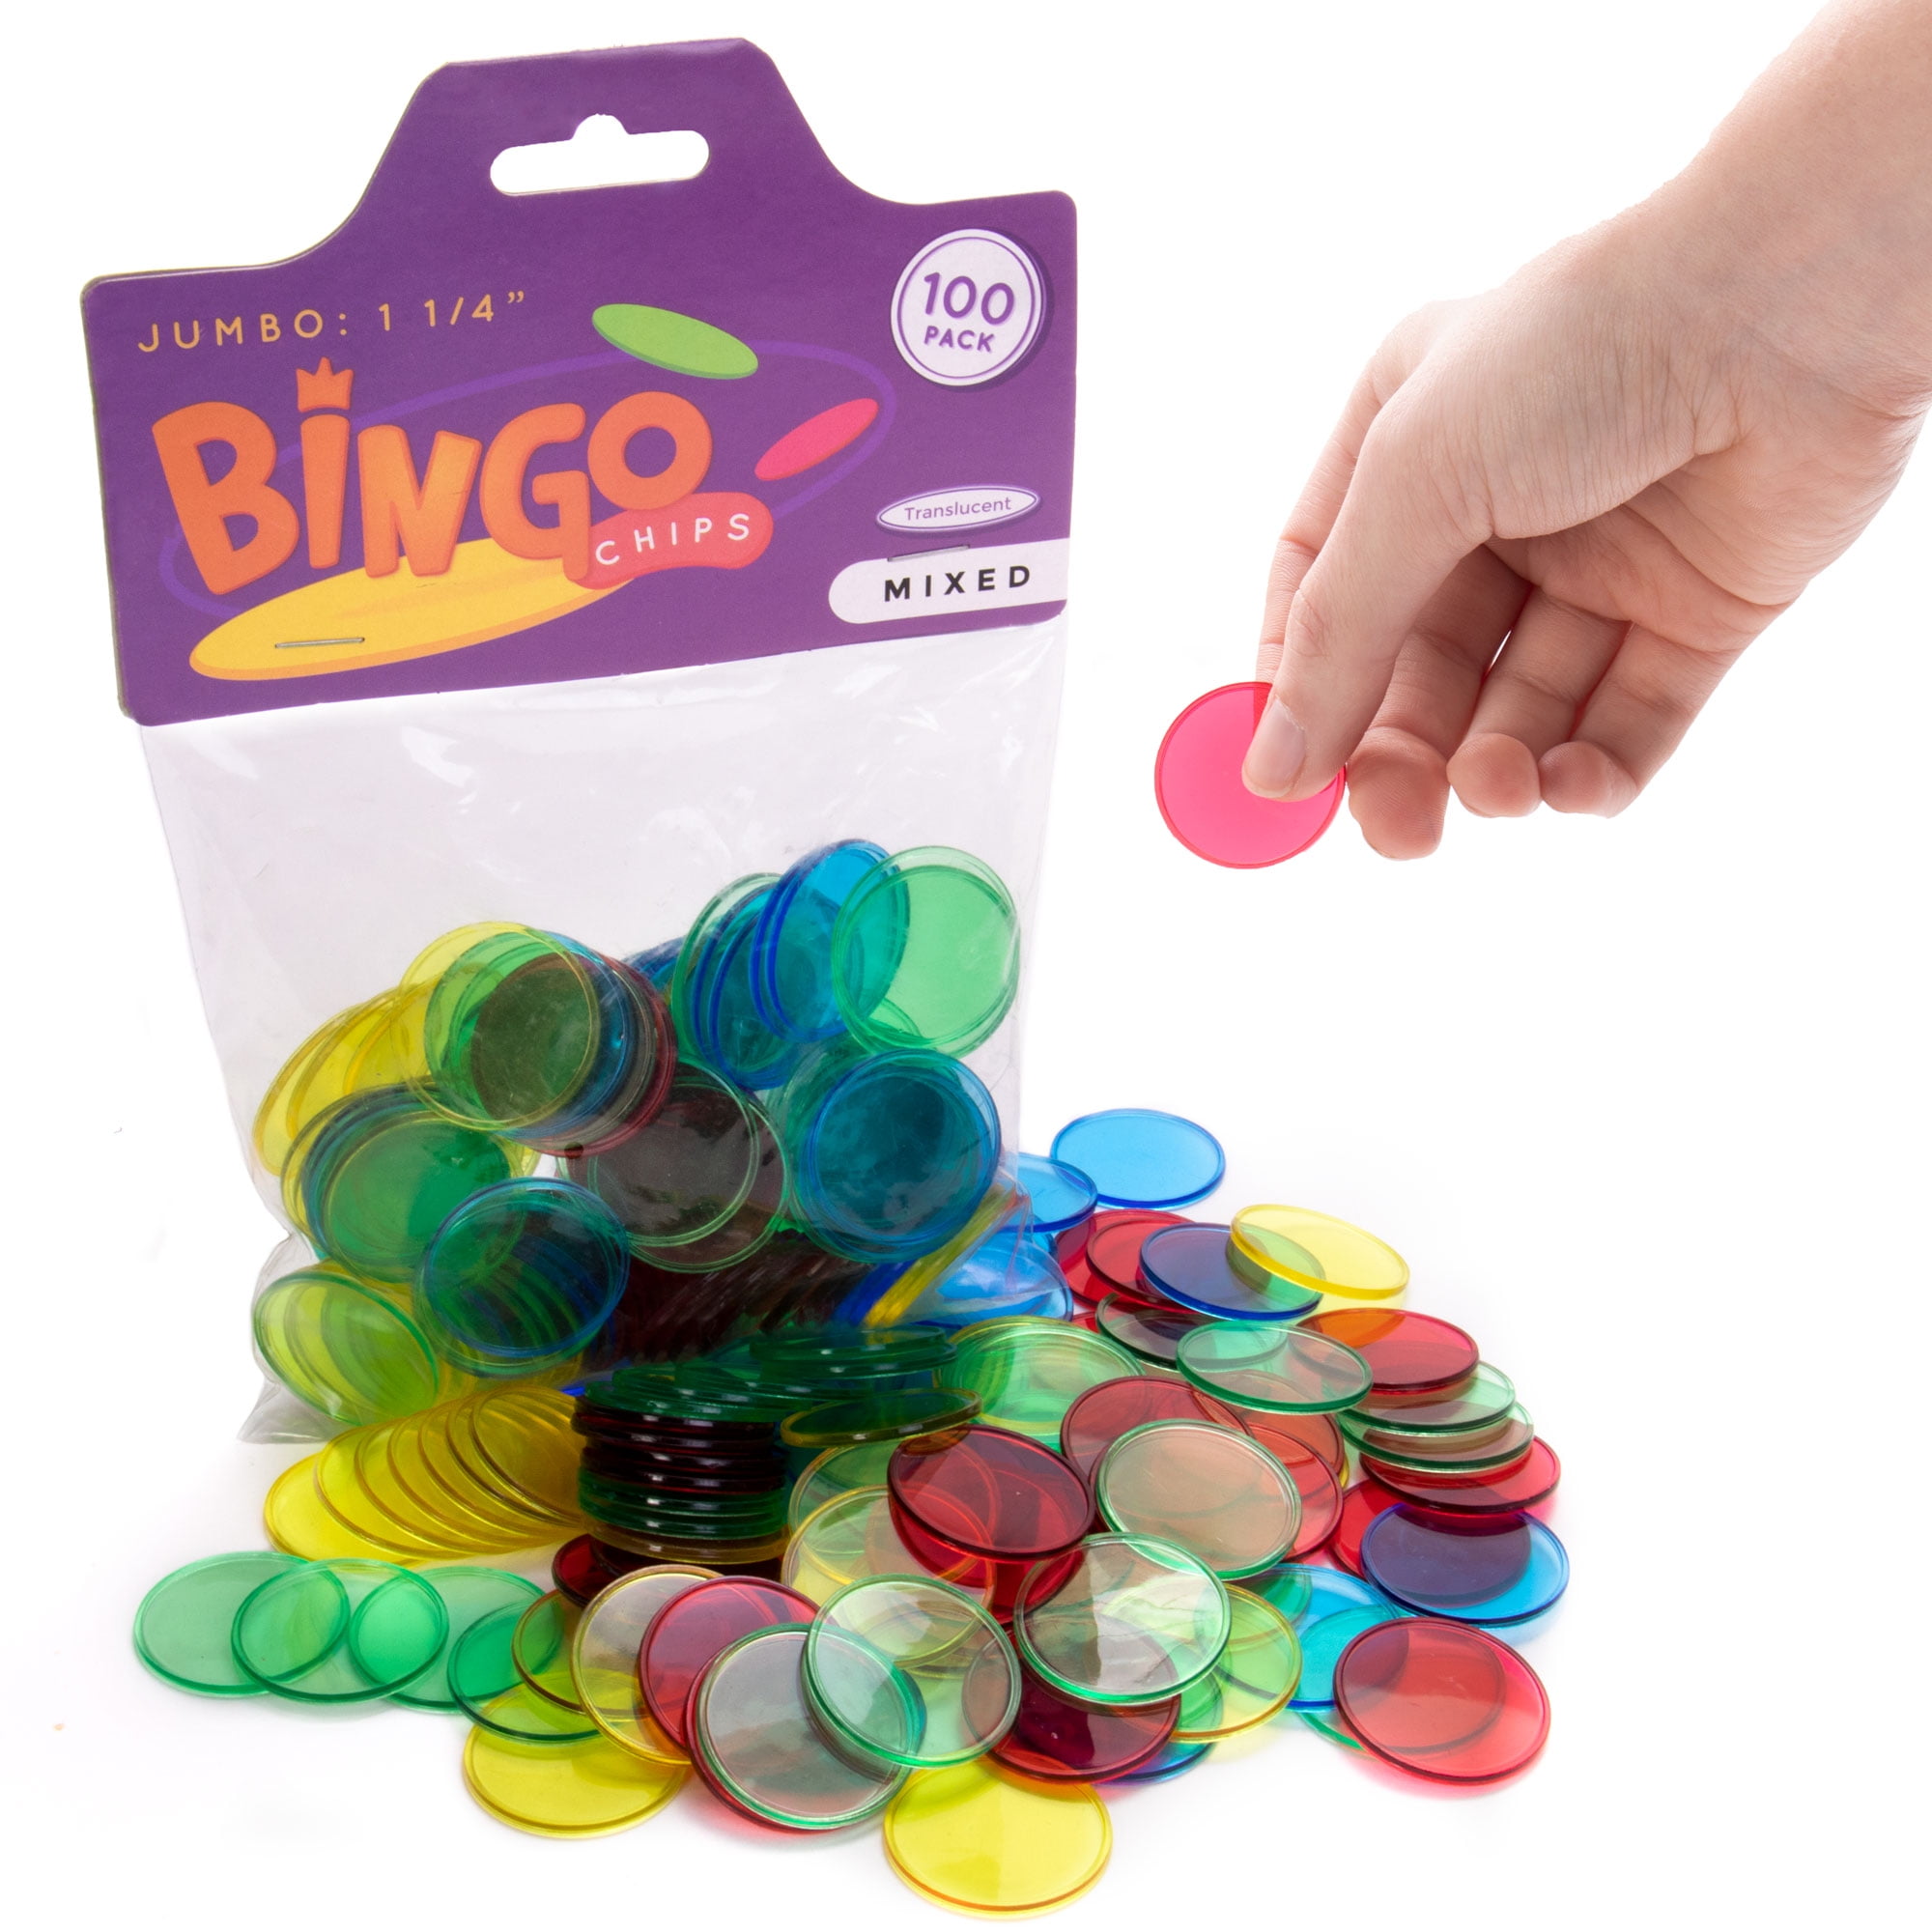 200 BINGO CHIPS CLEAR PLASTIC NEW USA SELLER EASY PICKUP PICK YOUR COLOR 